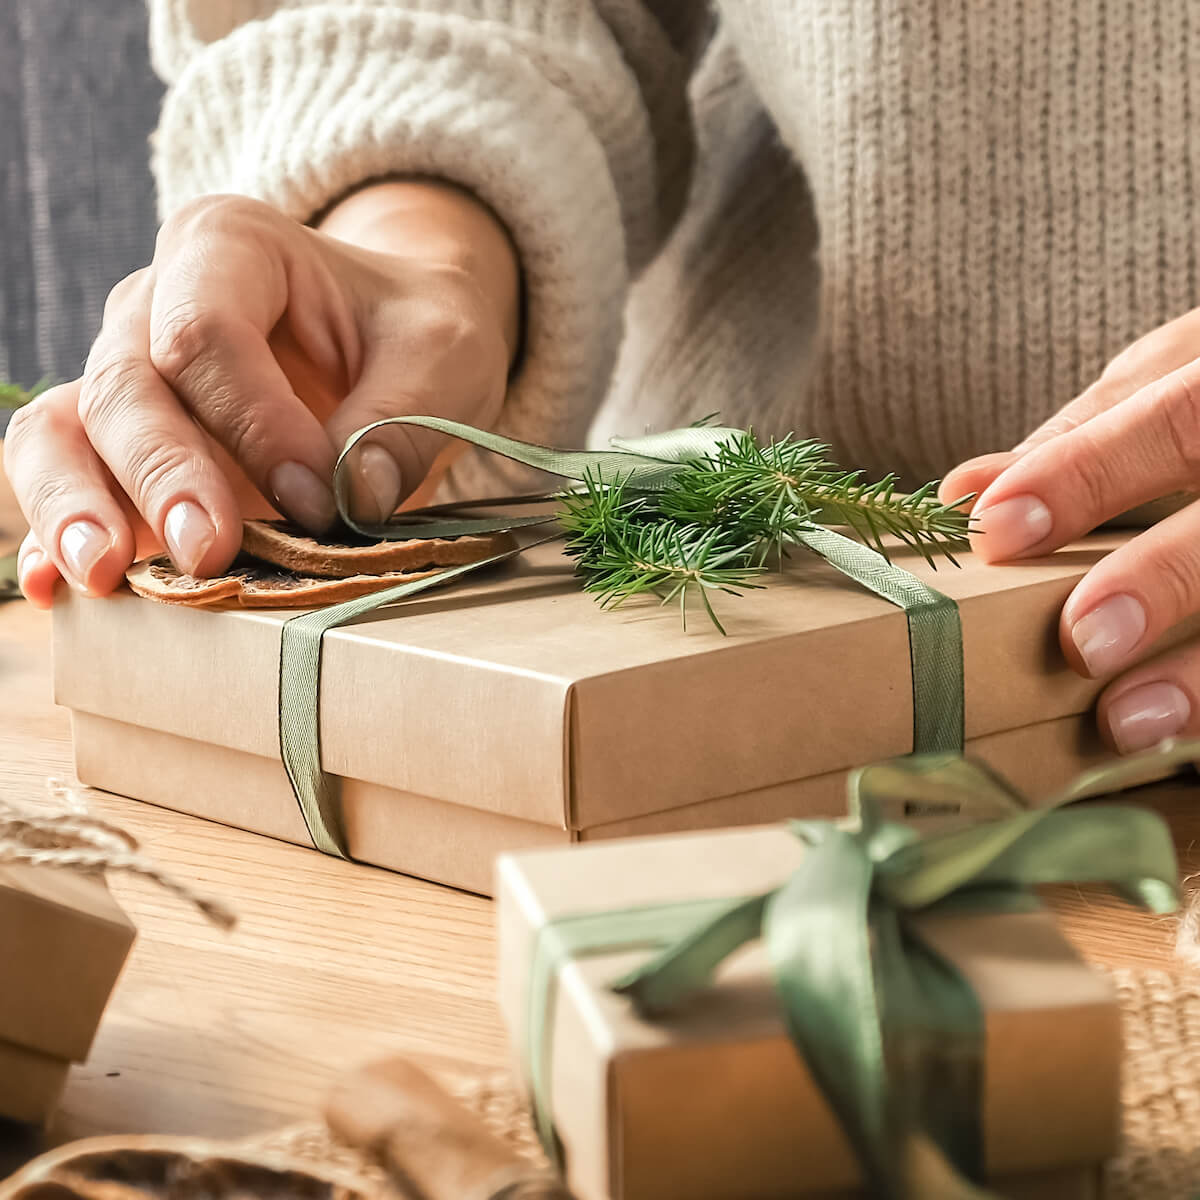 Unique Gift Ideas for Women Over 50 That They'll Love